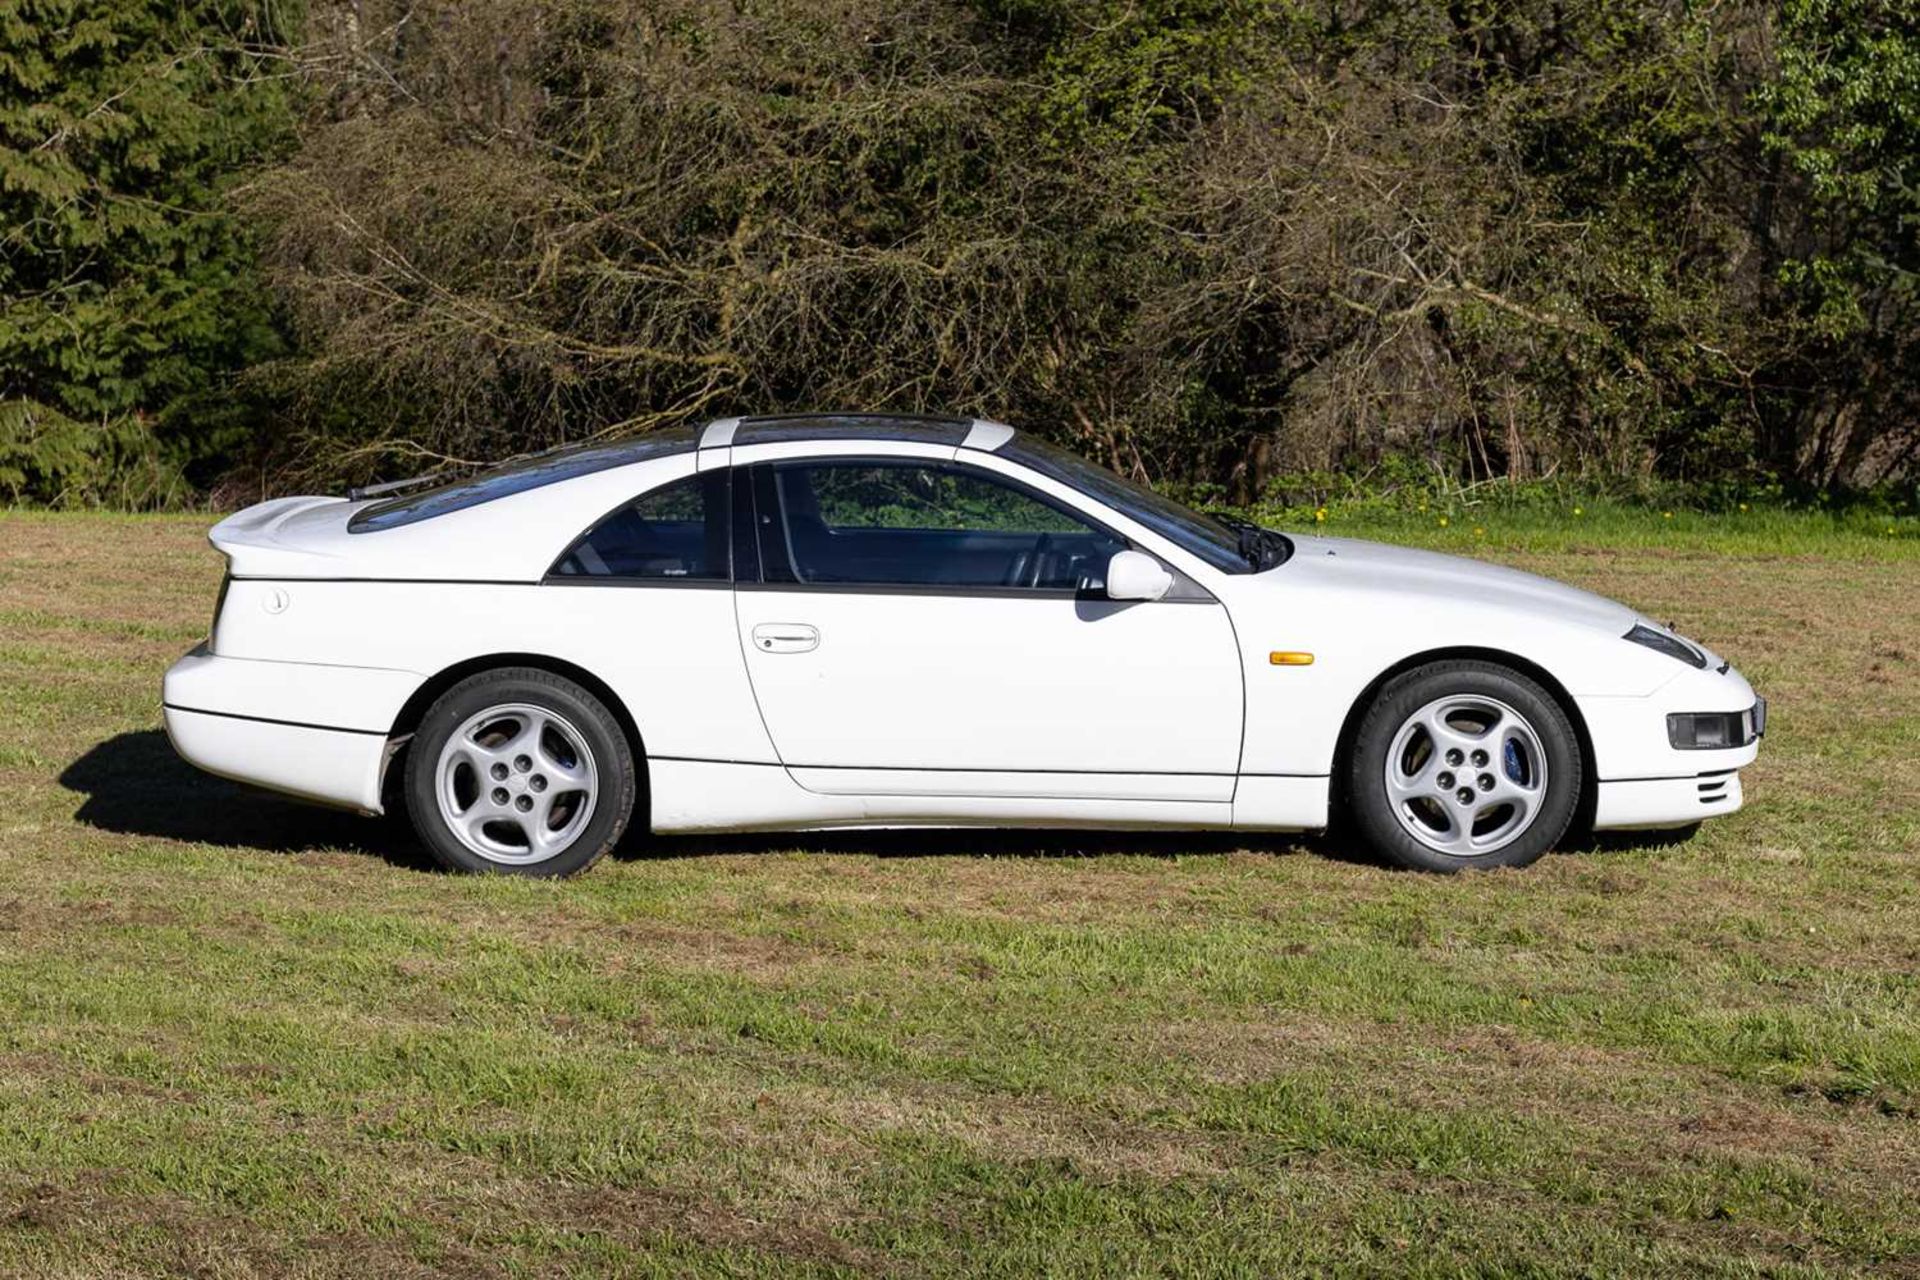 1990 Nissan 300ZX Turbo 2+2 Targa One of the last examples registered in the UK - Image 2 of 89